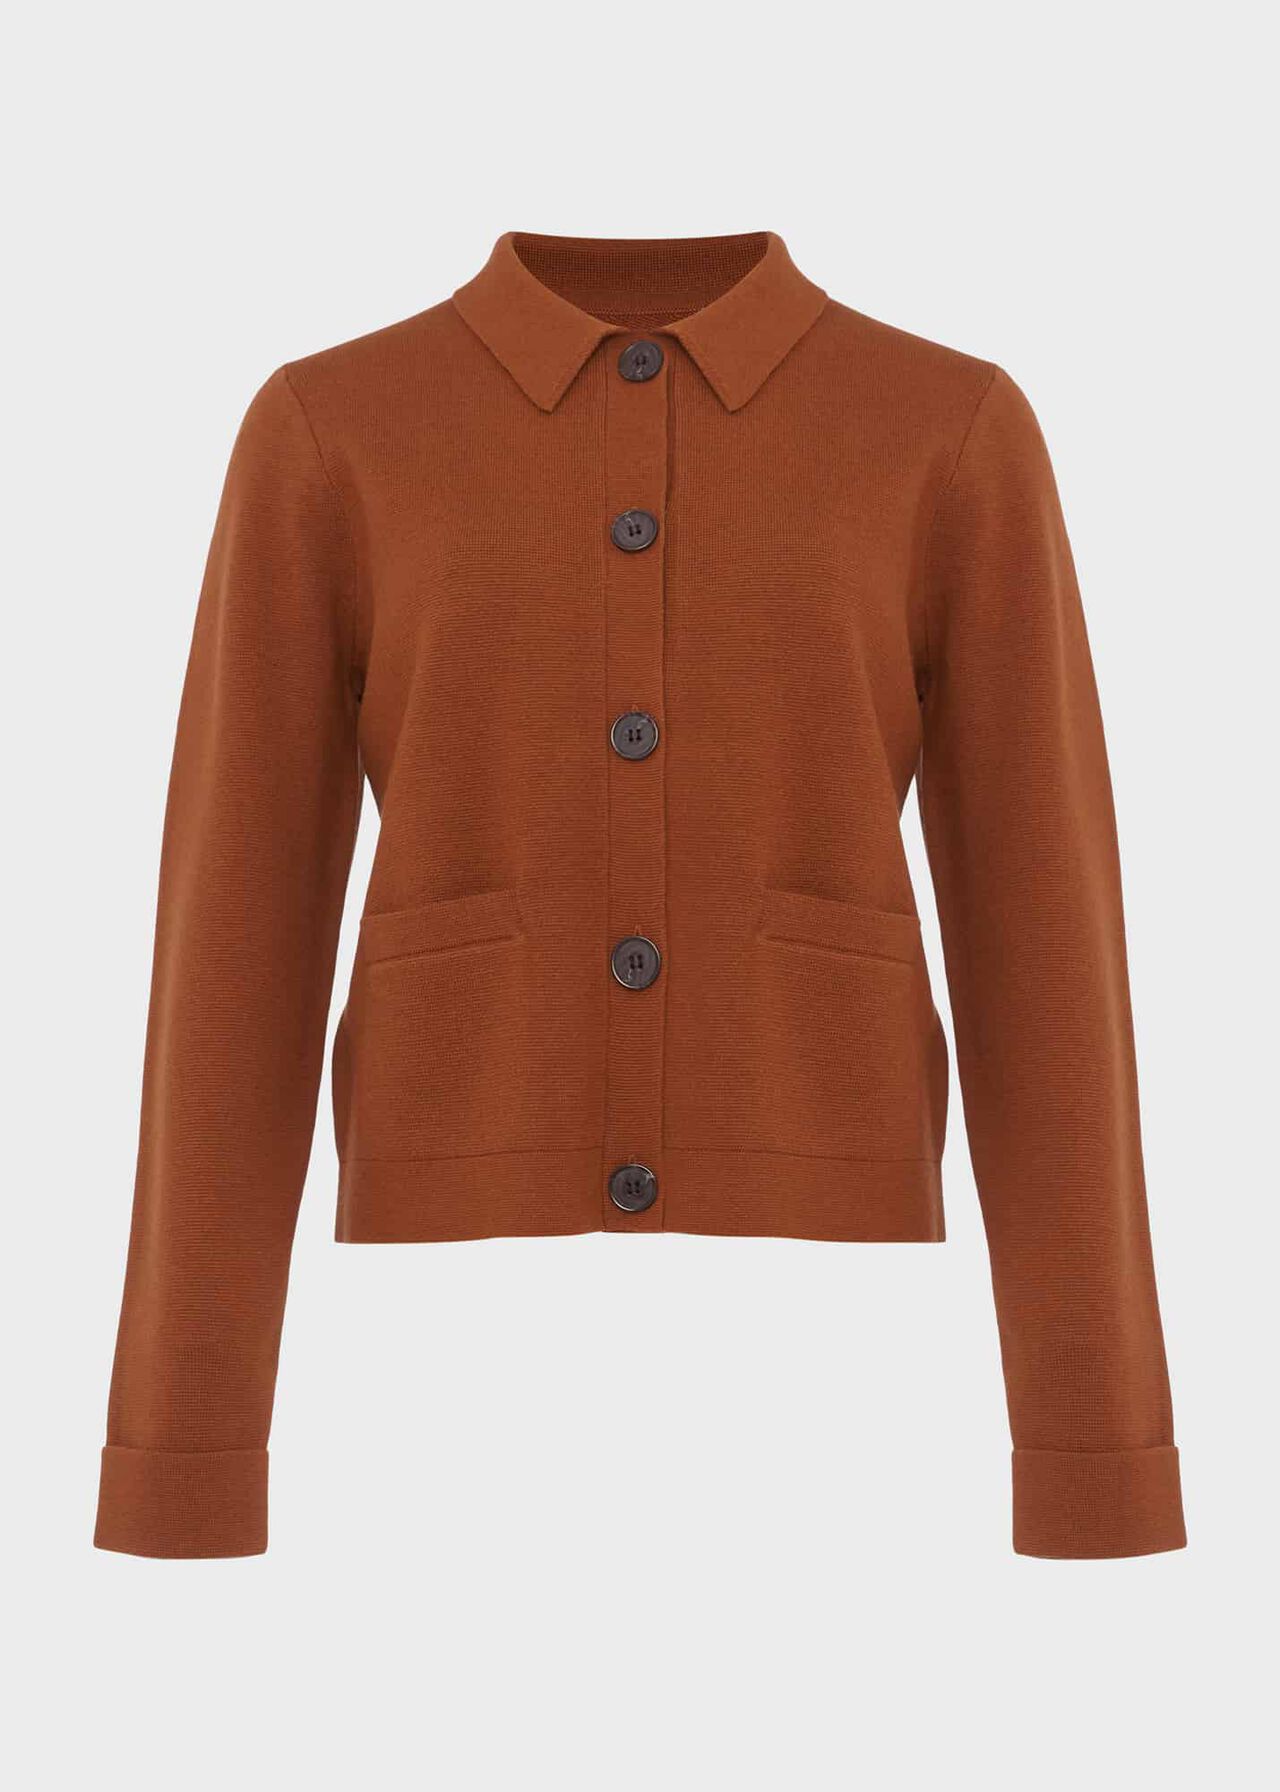 Mia Cotton Wool Knitted Jacket, Toffee, hi-res